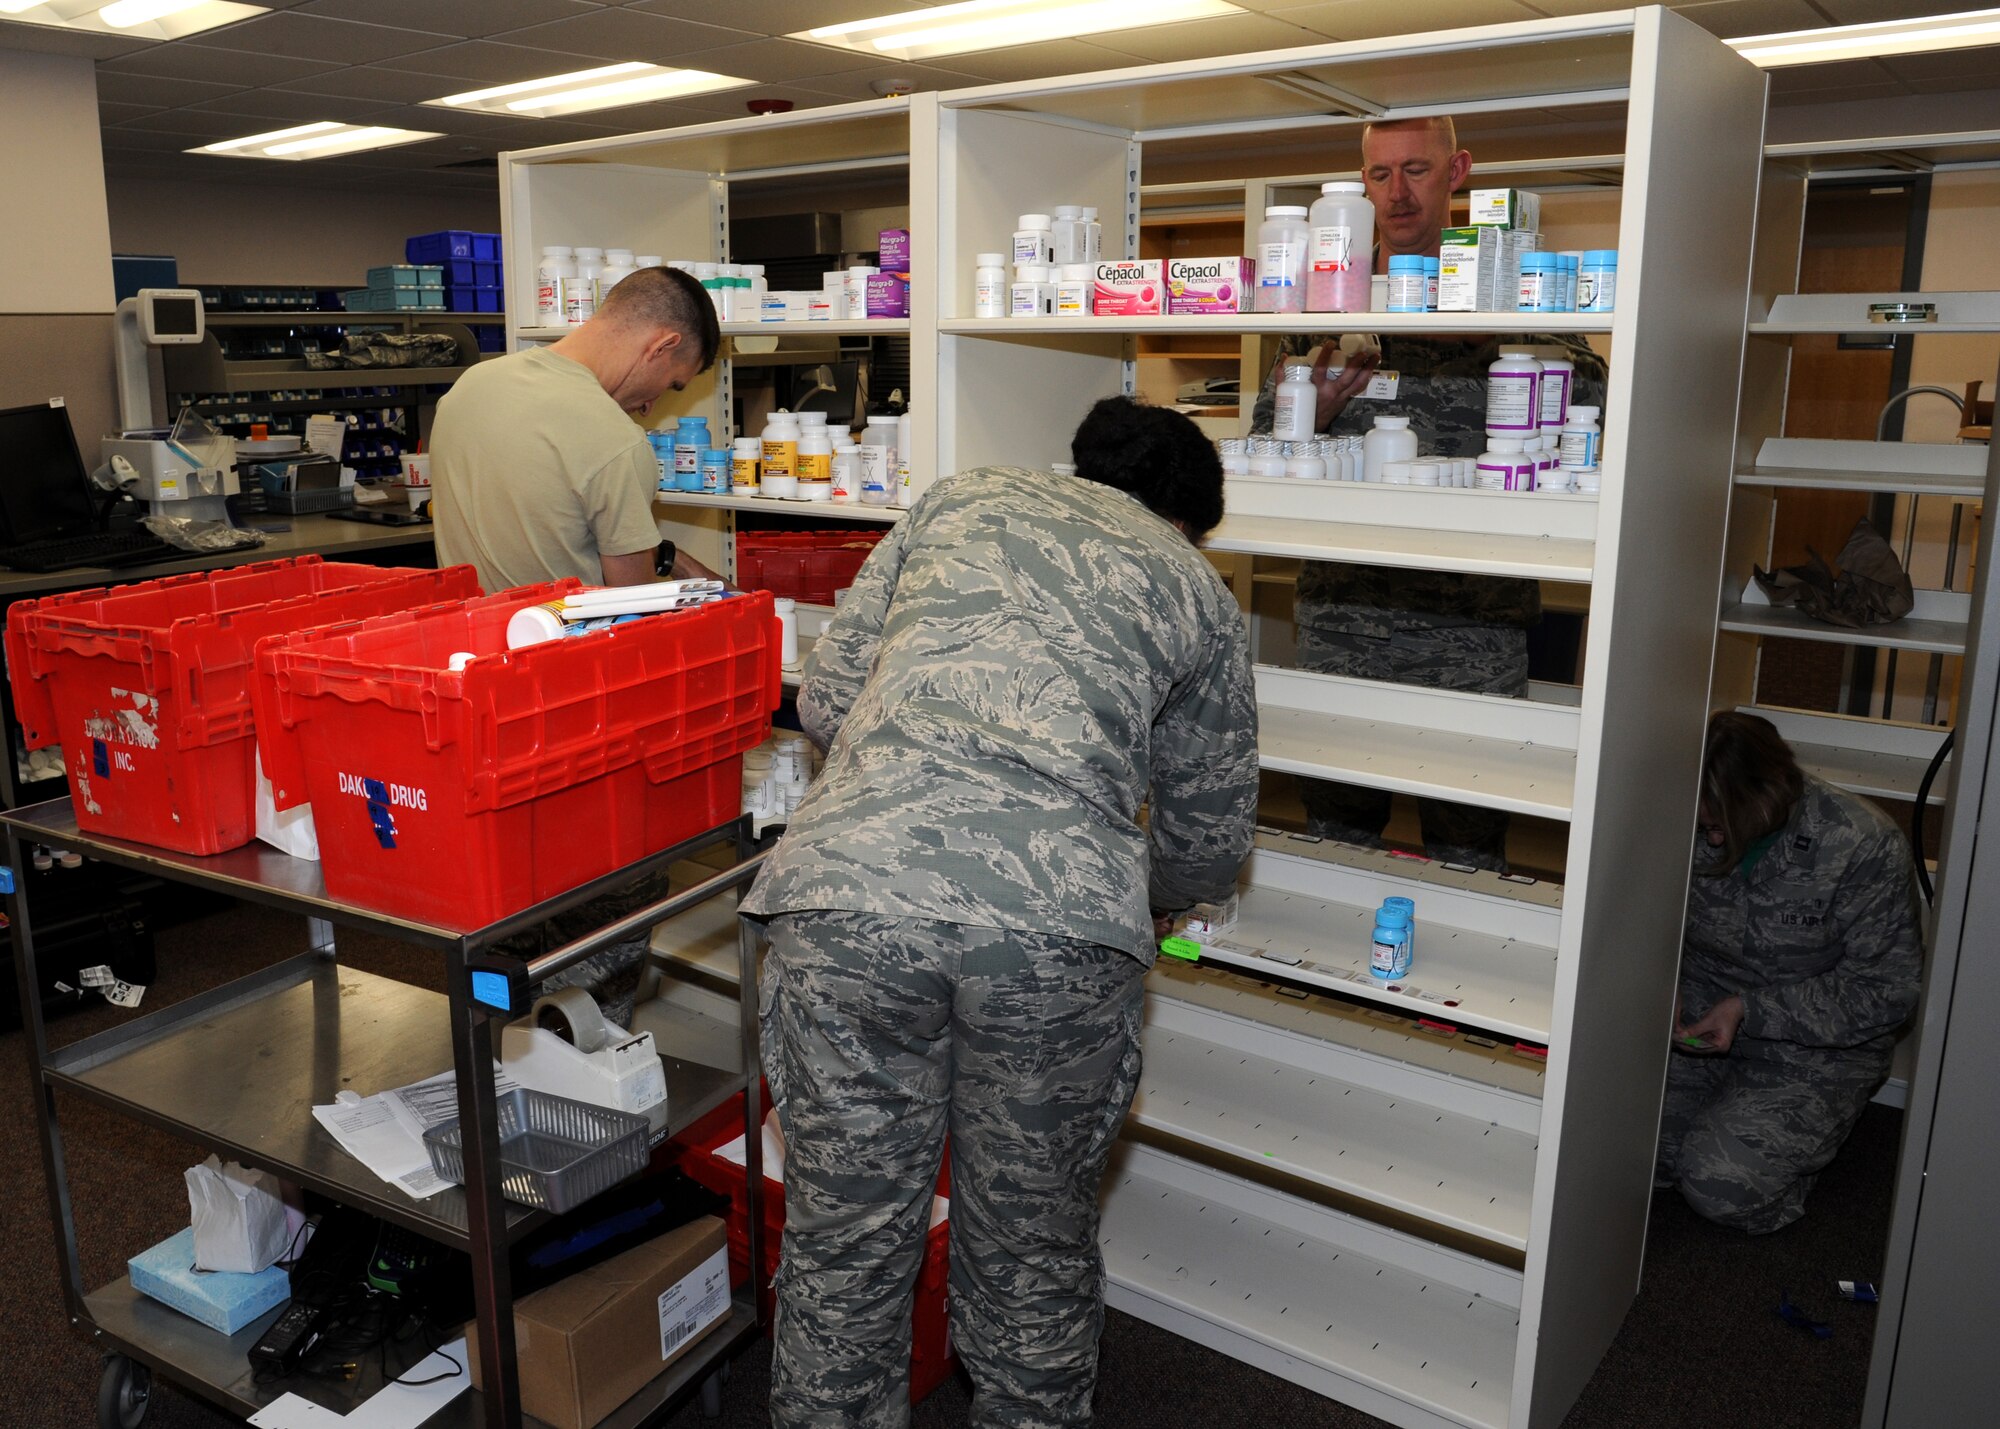 Airmen with the 319th Medical Group put the finishing touches on the new pharmacy location Dec. 18, 2015, on Grand Forks Air Force Base, North Dakota. After more than eight months, the $9.2 million renovation to the Medical Treatment Facility was finished. (U.S. Air Force photo by Airman 1st Class Ryan Sparks/Released)